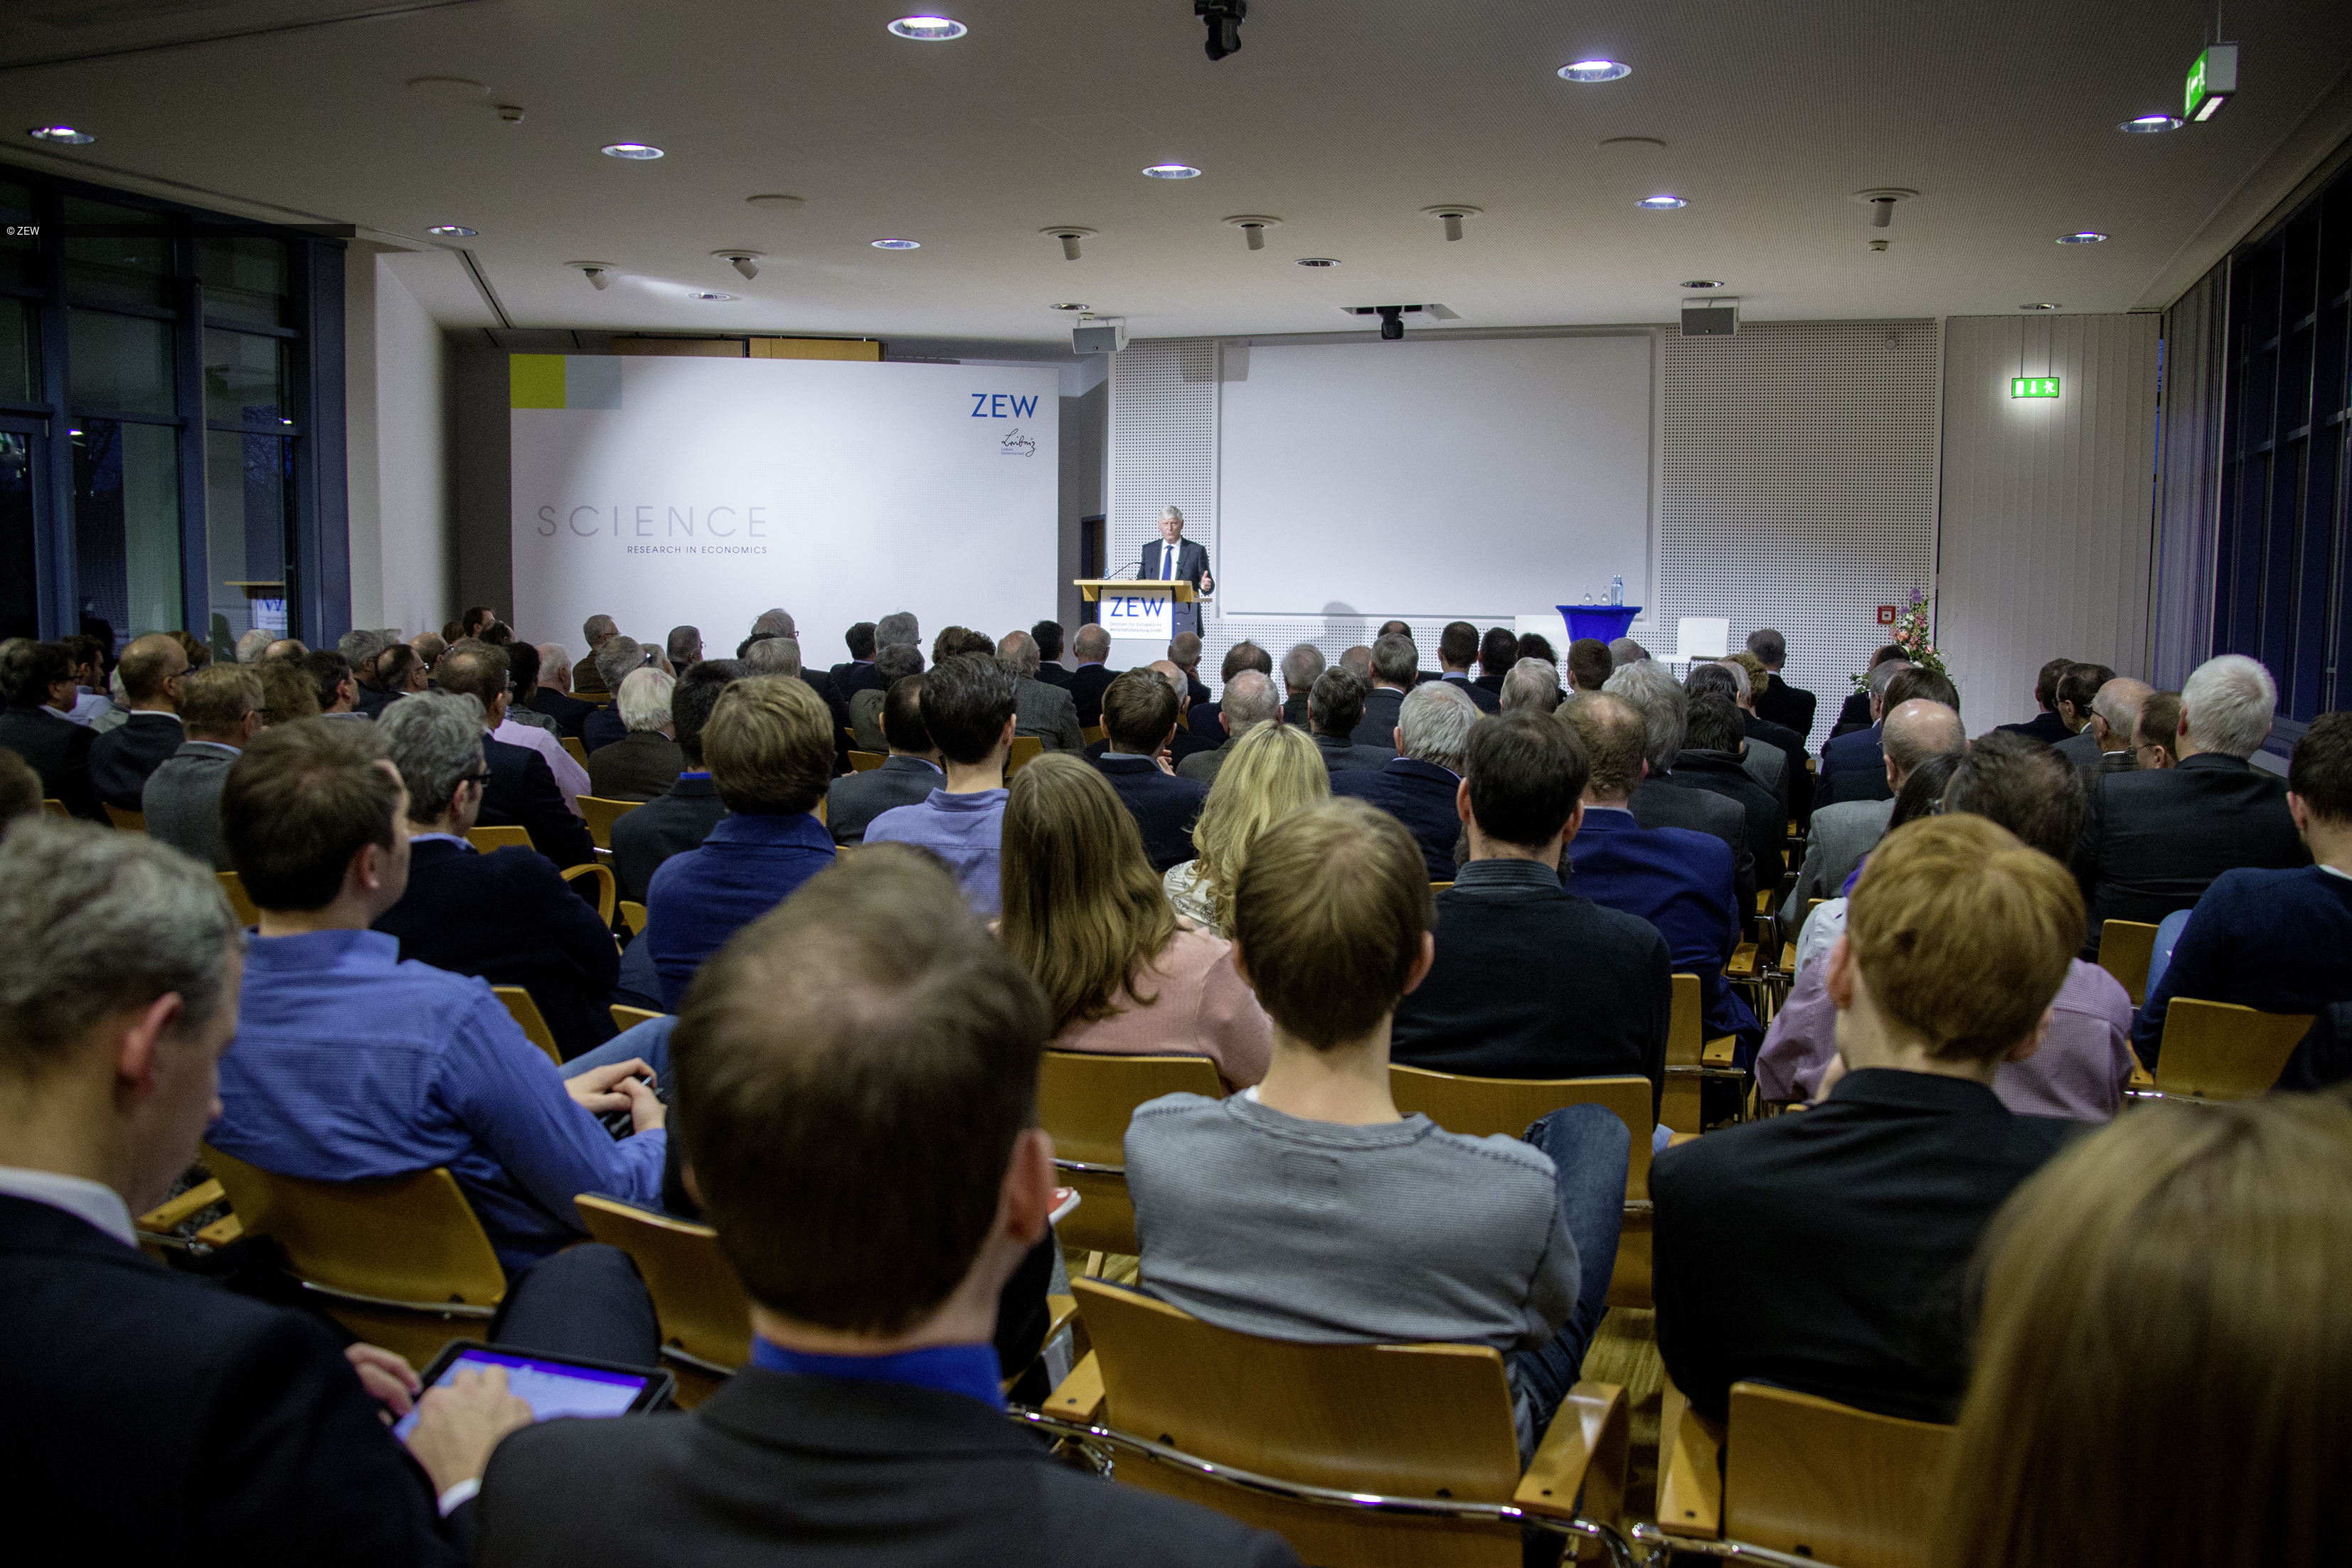 Event at ZEW focused on Germany’s Energy Transition